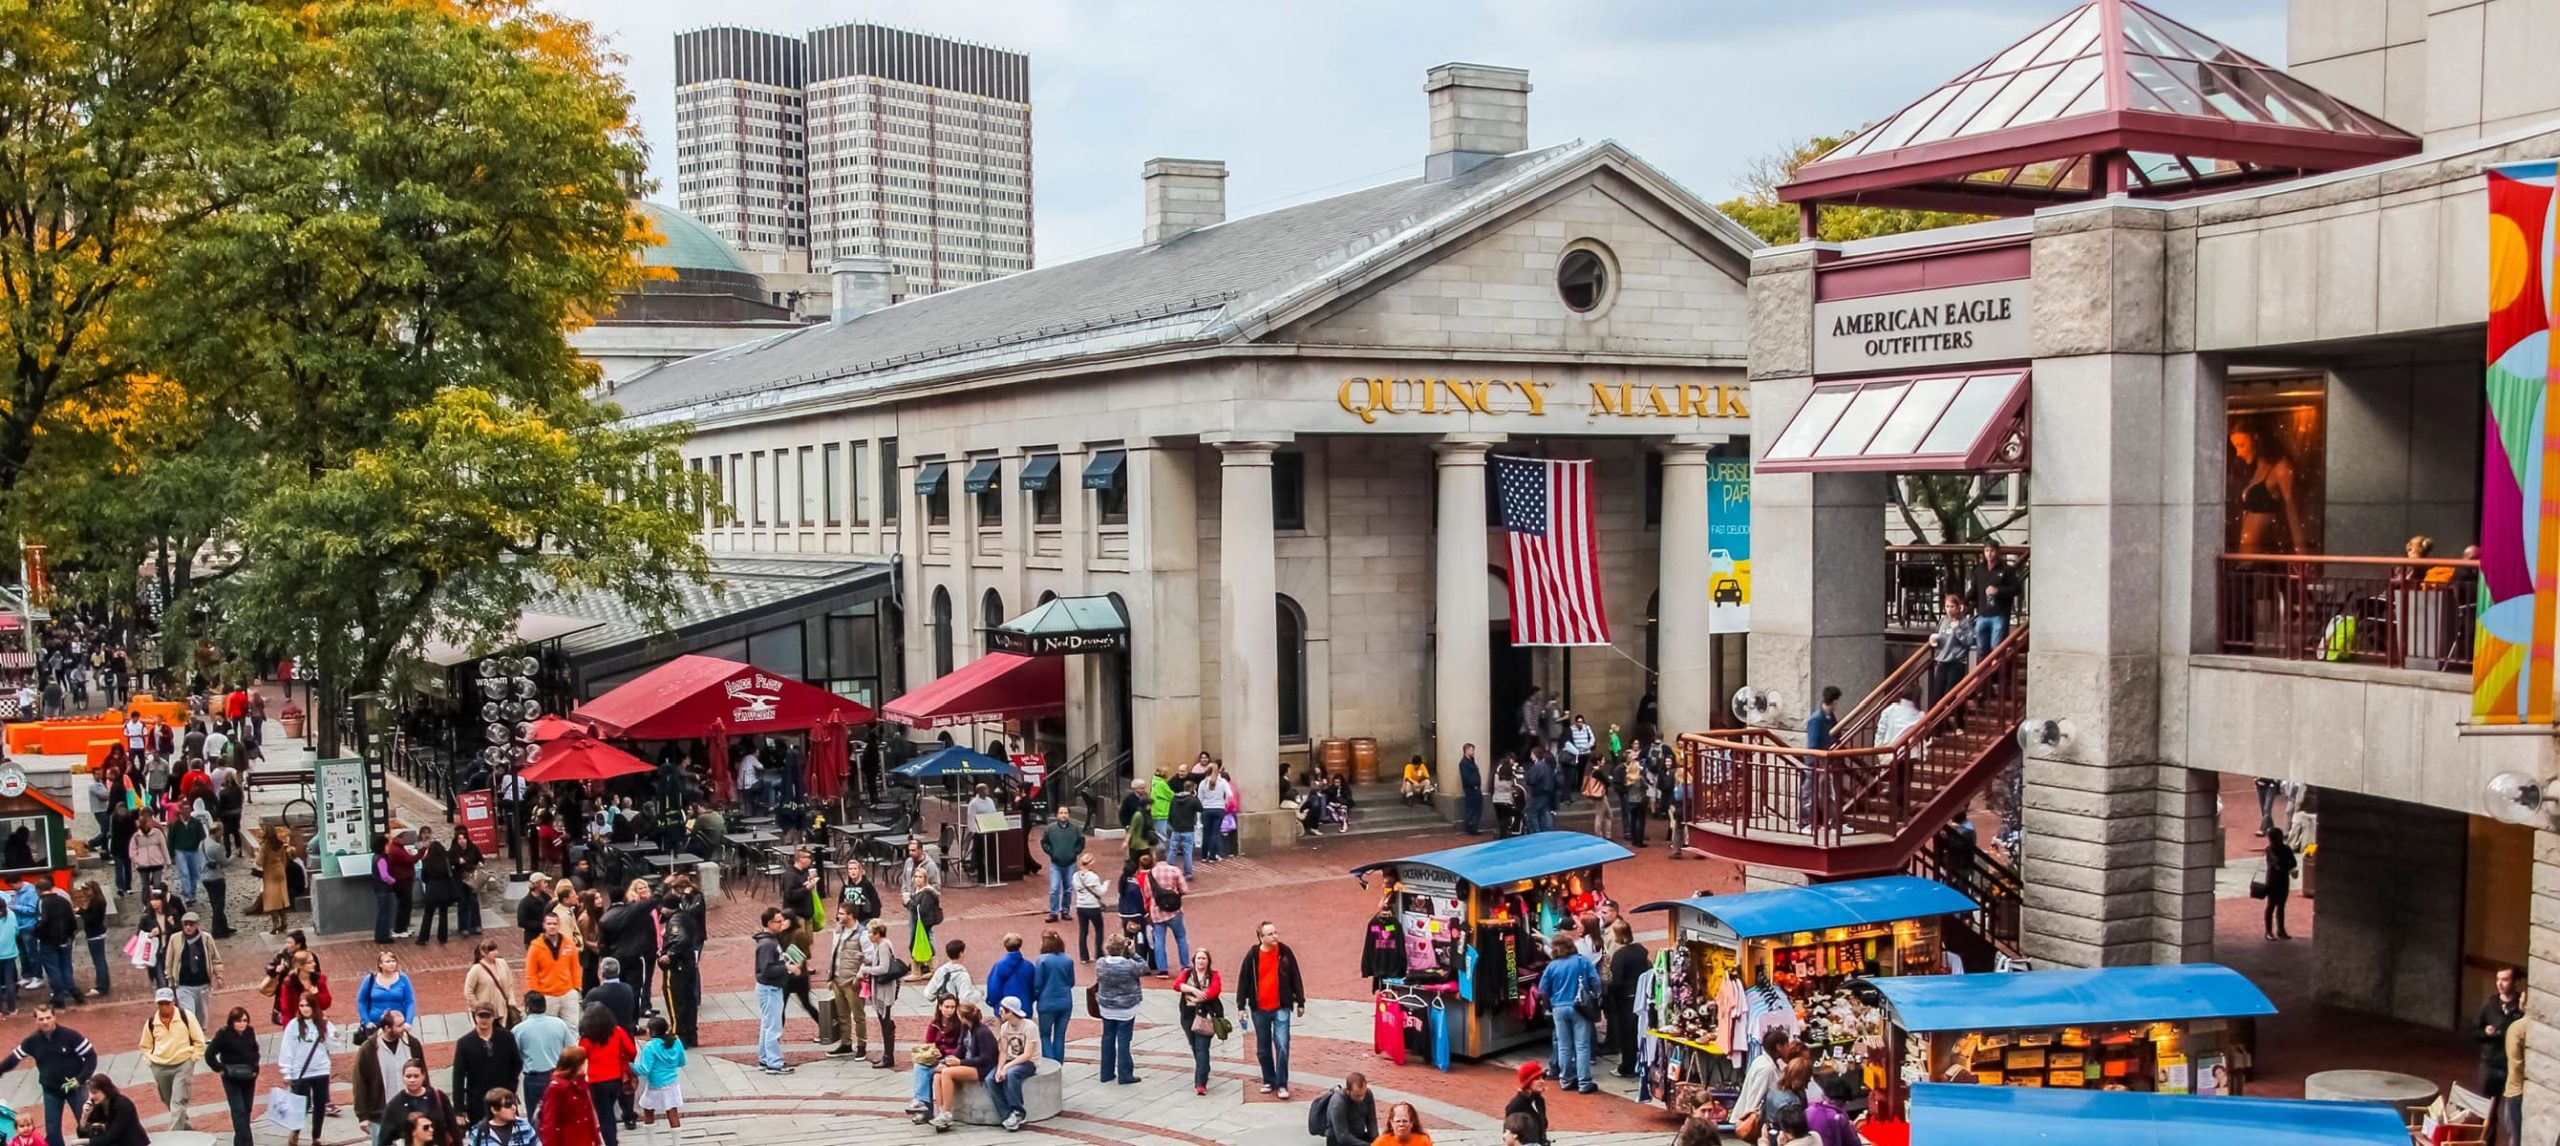 6 Amazing Free Things To Do In Boston, MA